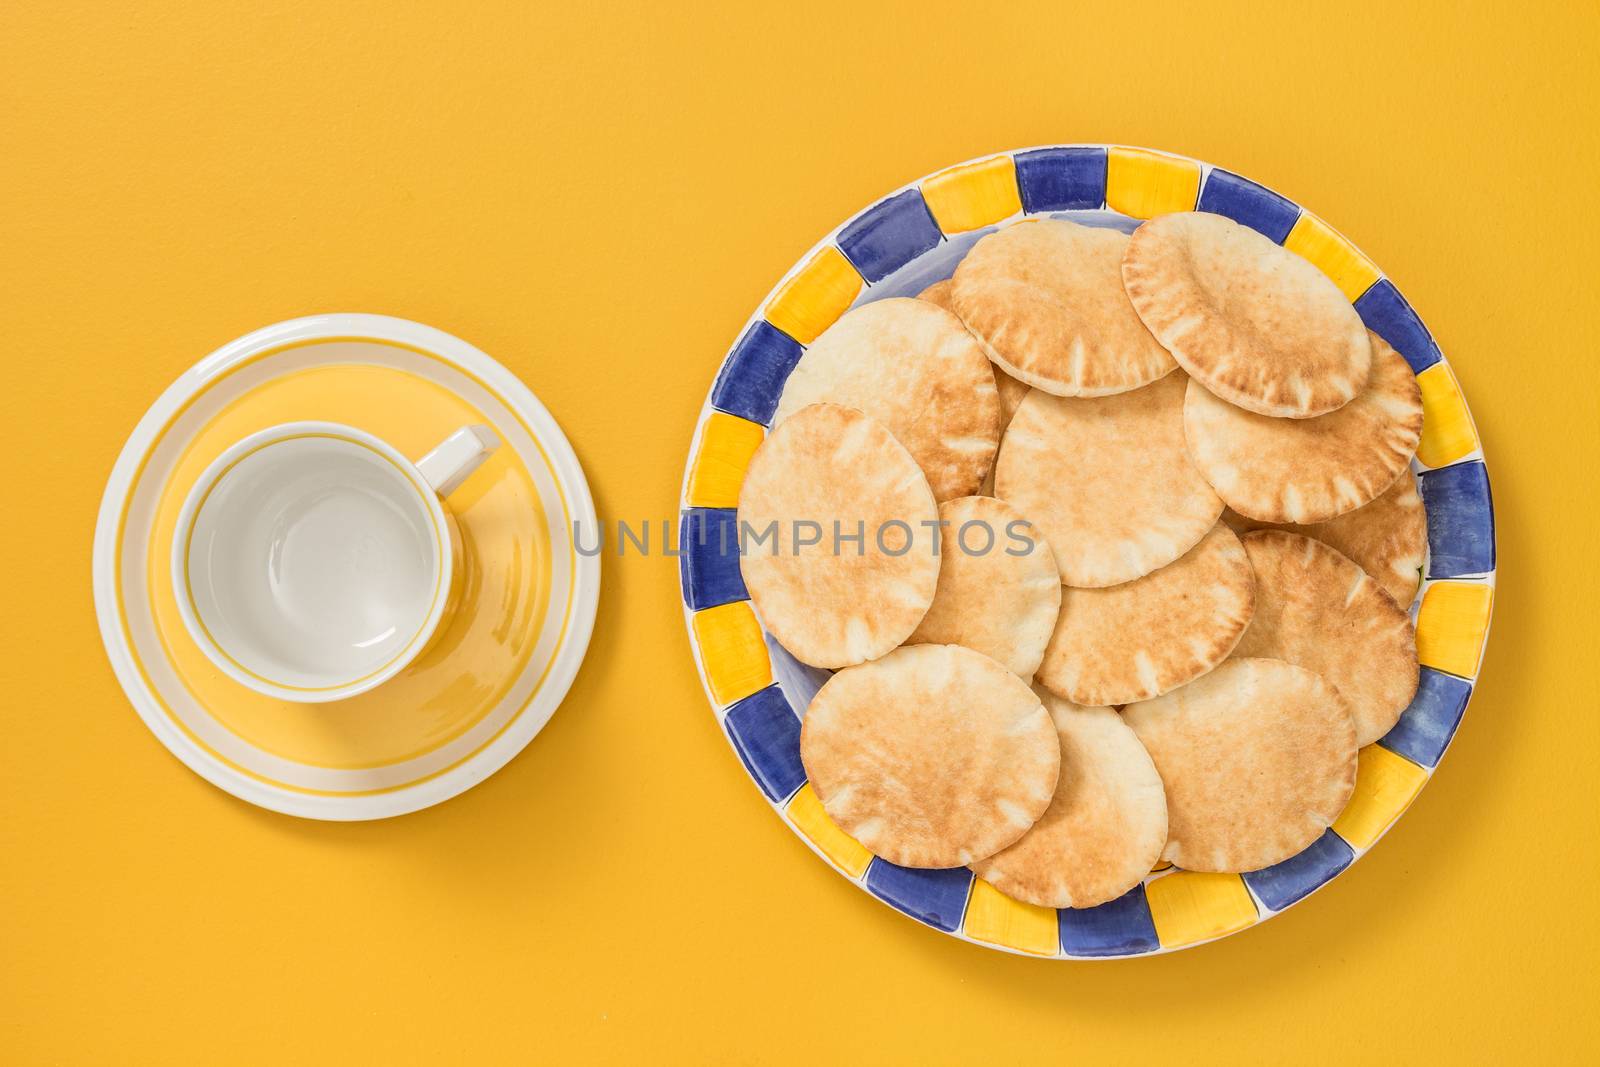 Teacup and colorful plate with mini pita bread on bright yellow background.